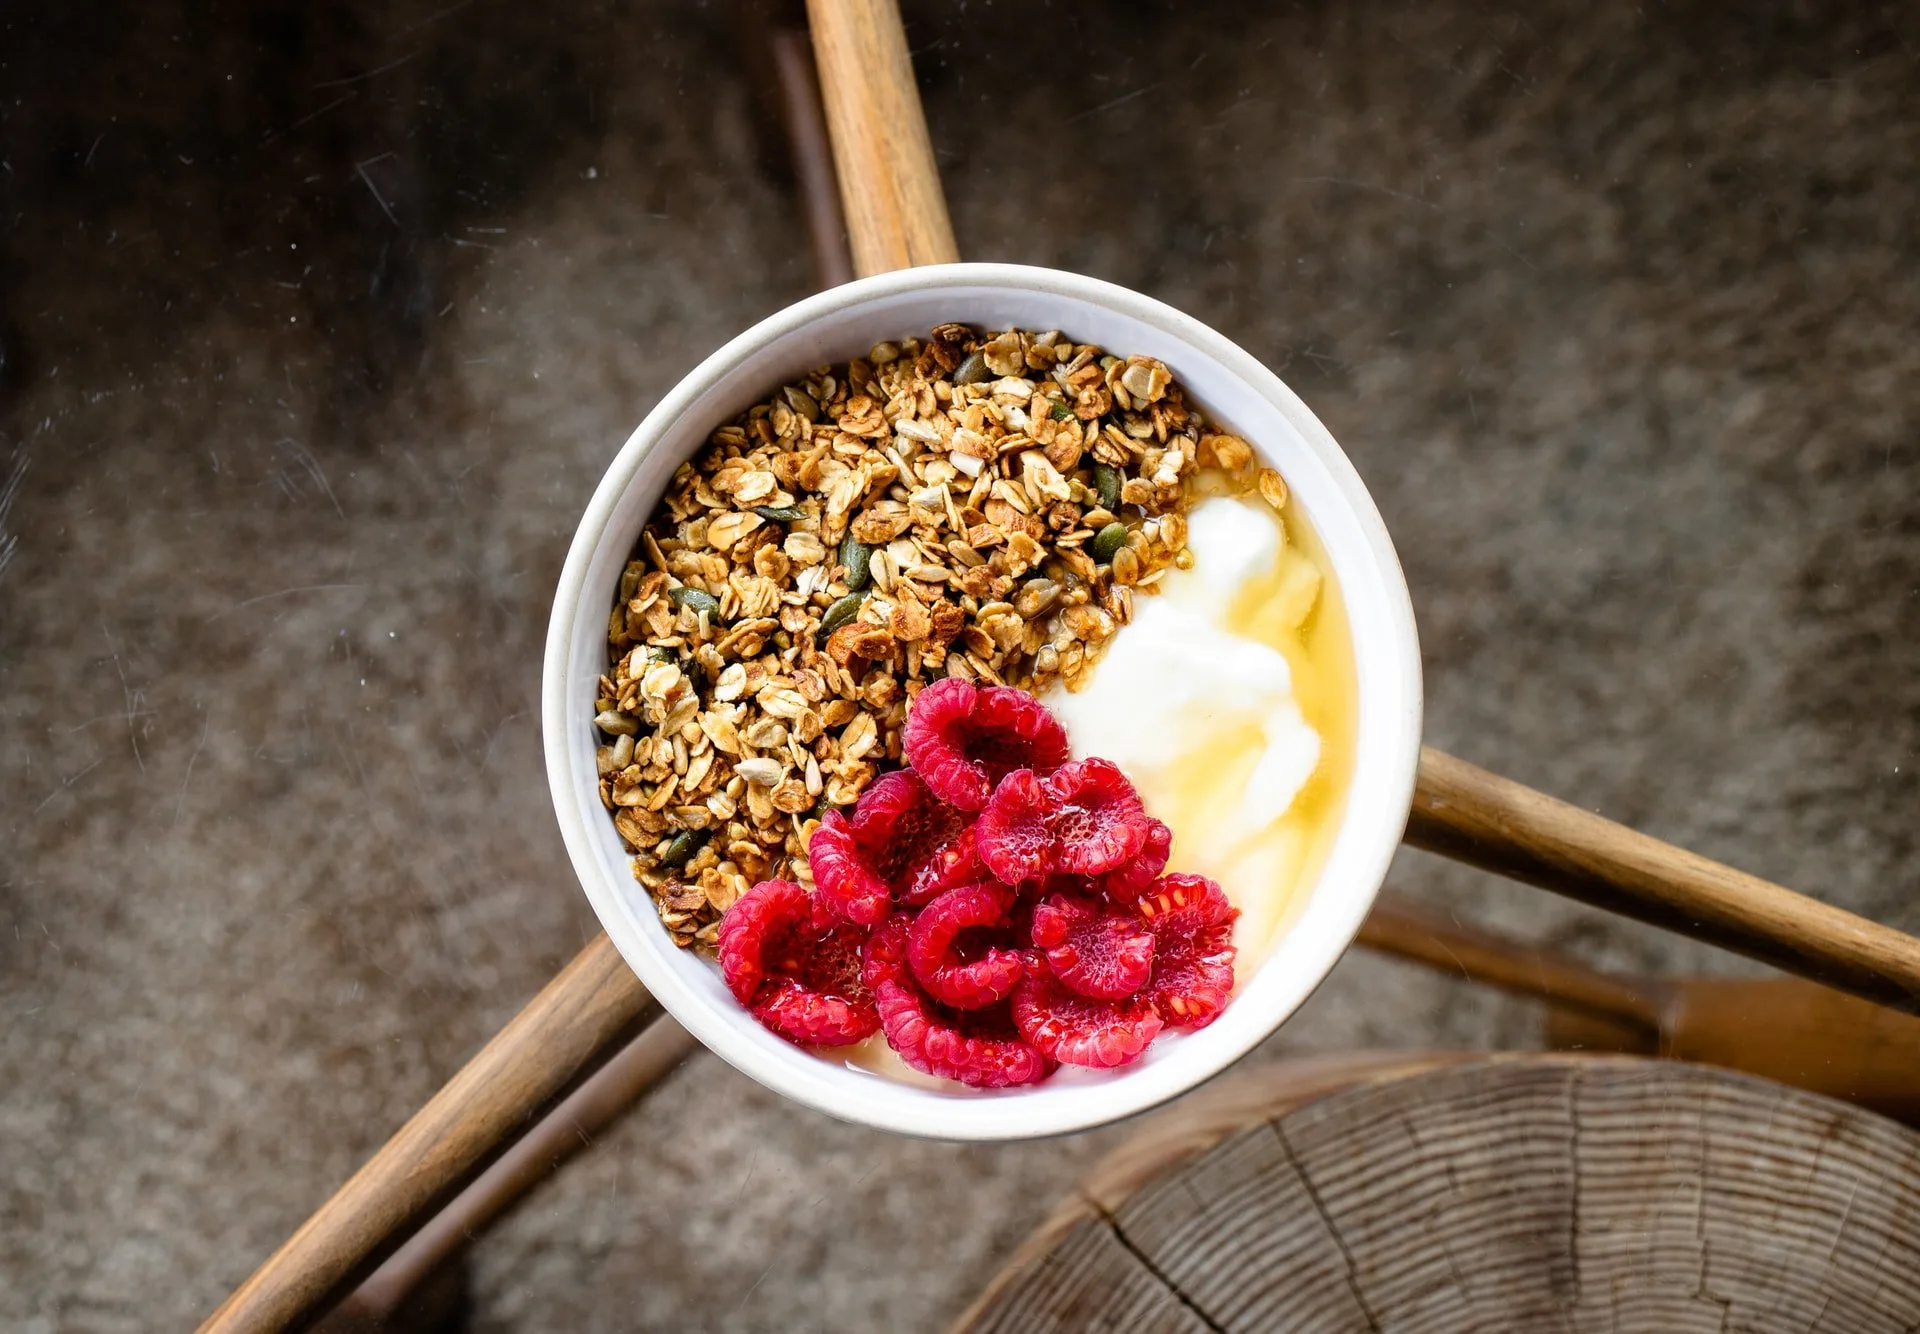 The Most Perfect Oats Porridge You’ve Ever Had